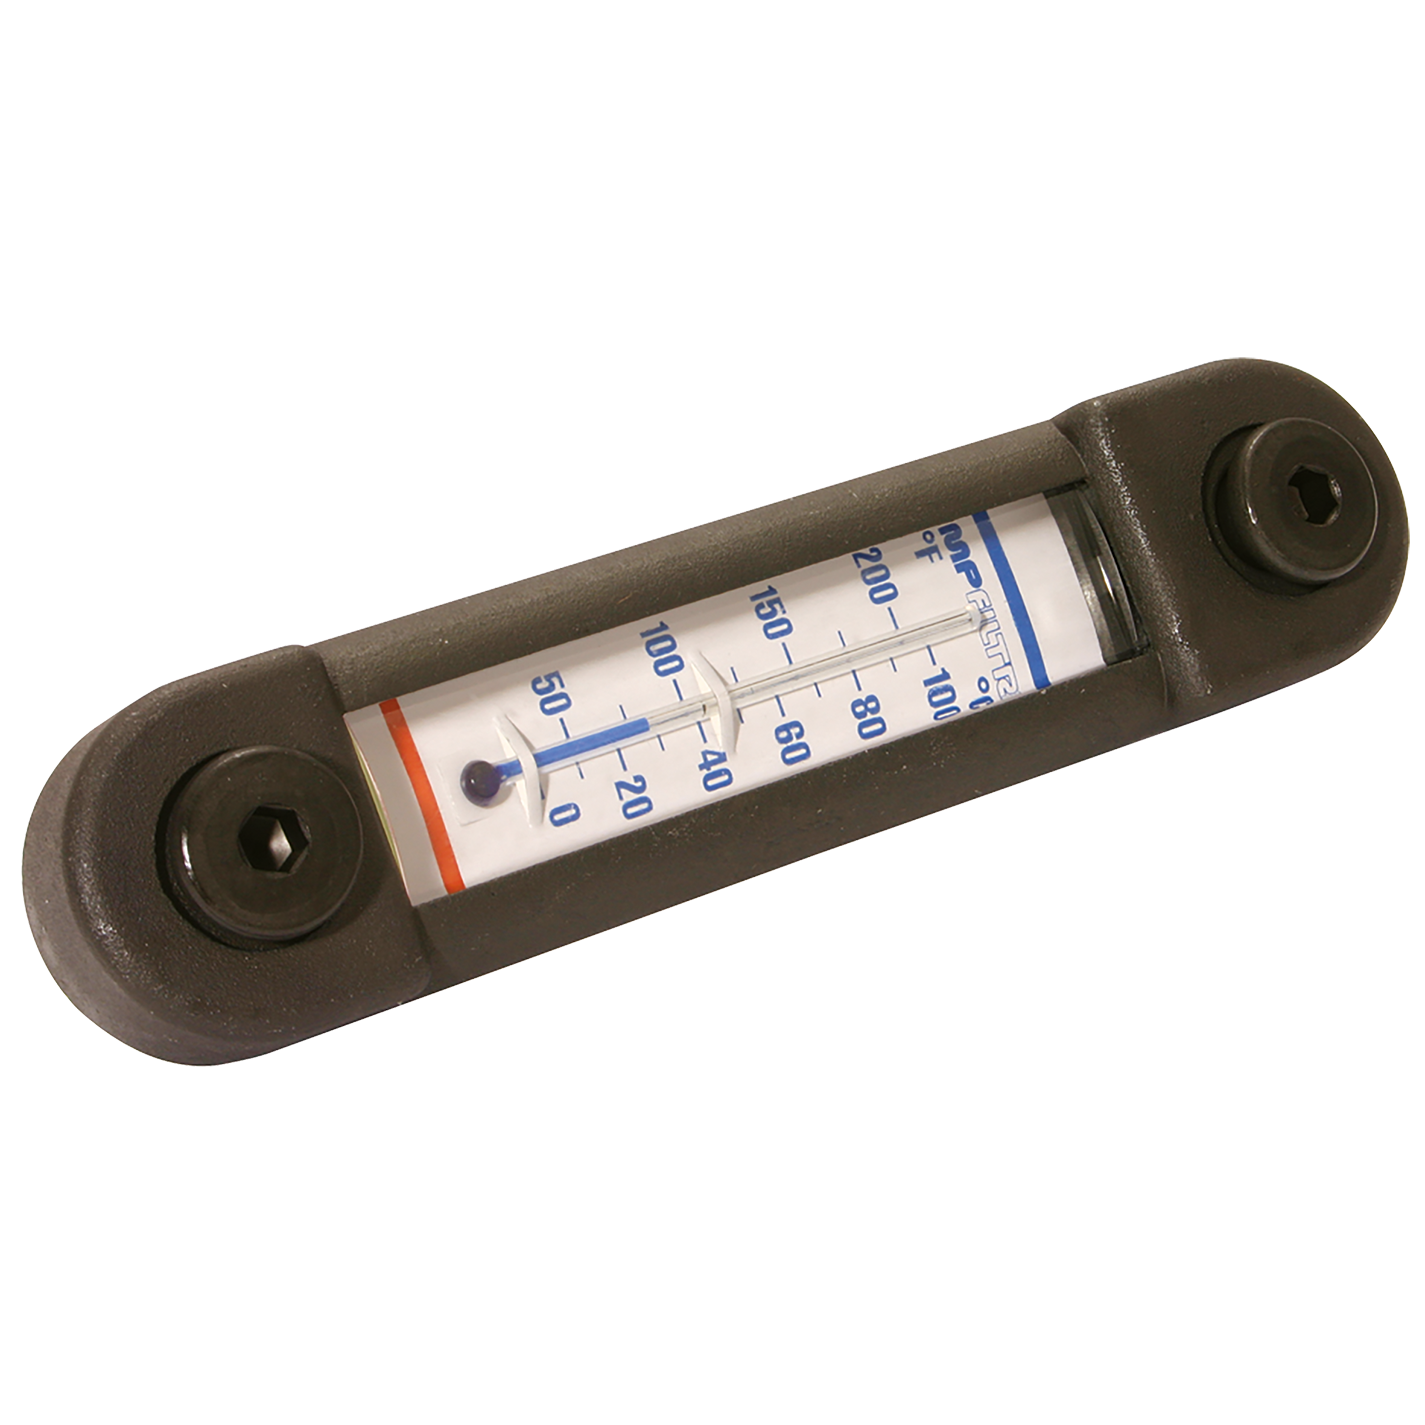 76mm Level Gauge With Thermometer M10 Bolt Thread